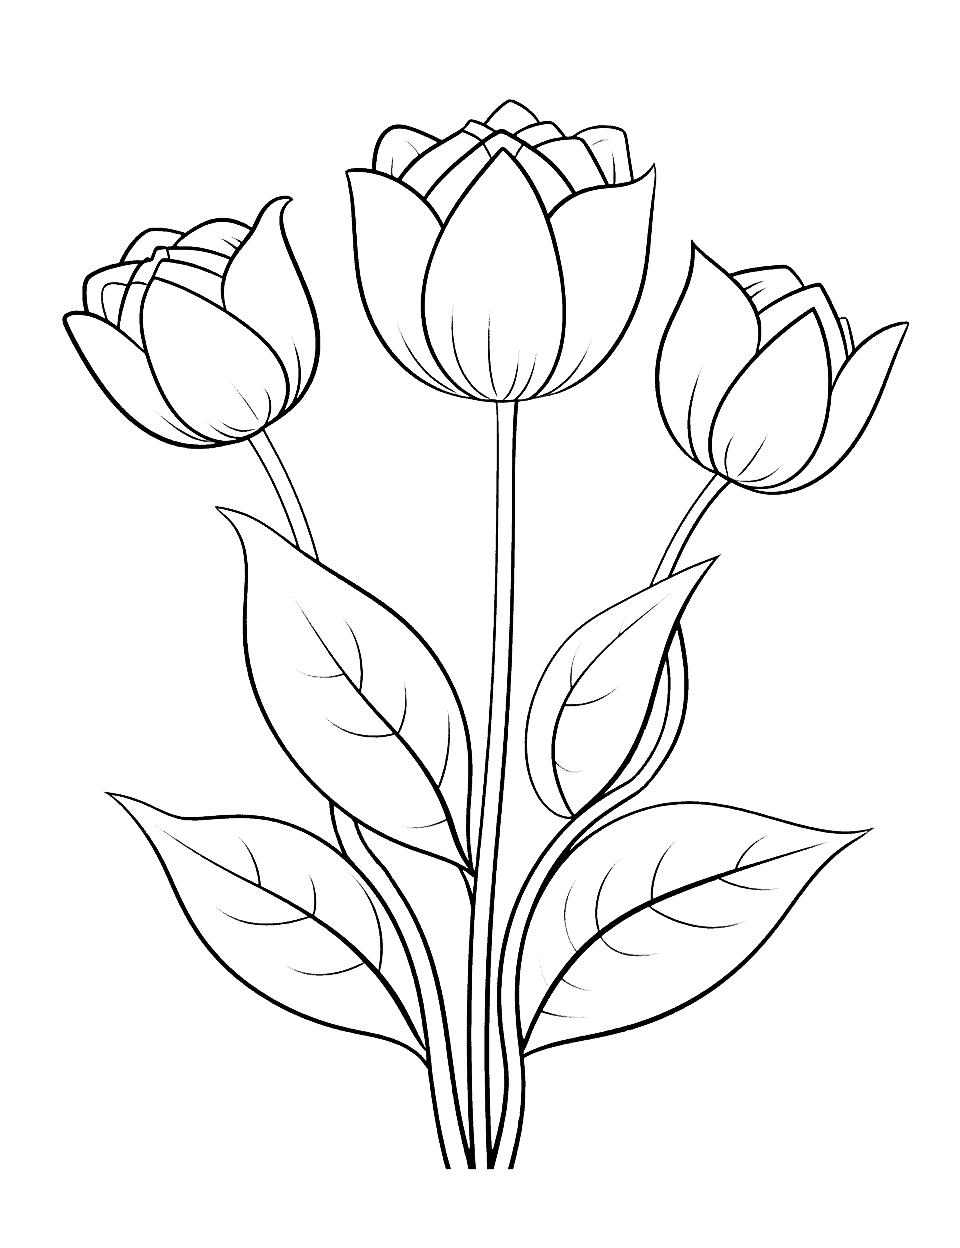 Tulip Trio Flower Coloring Page - Three beautiful tulips growing from a single stem.